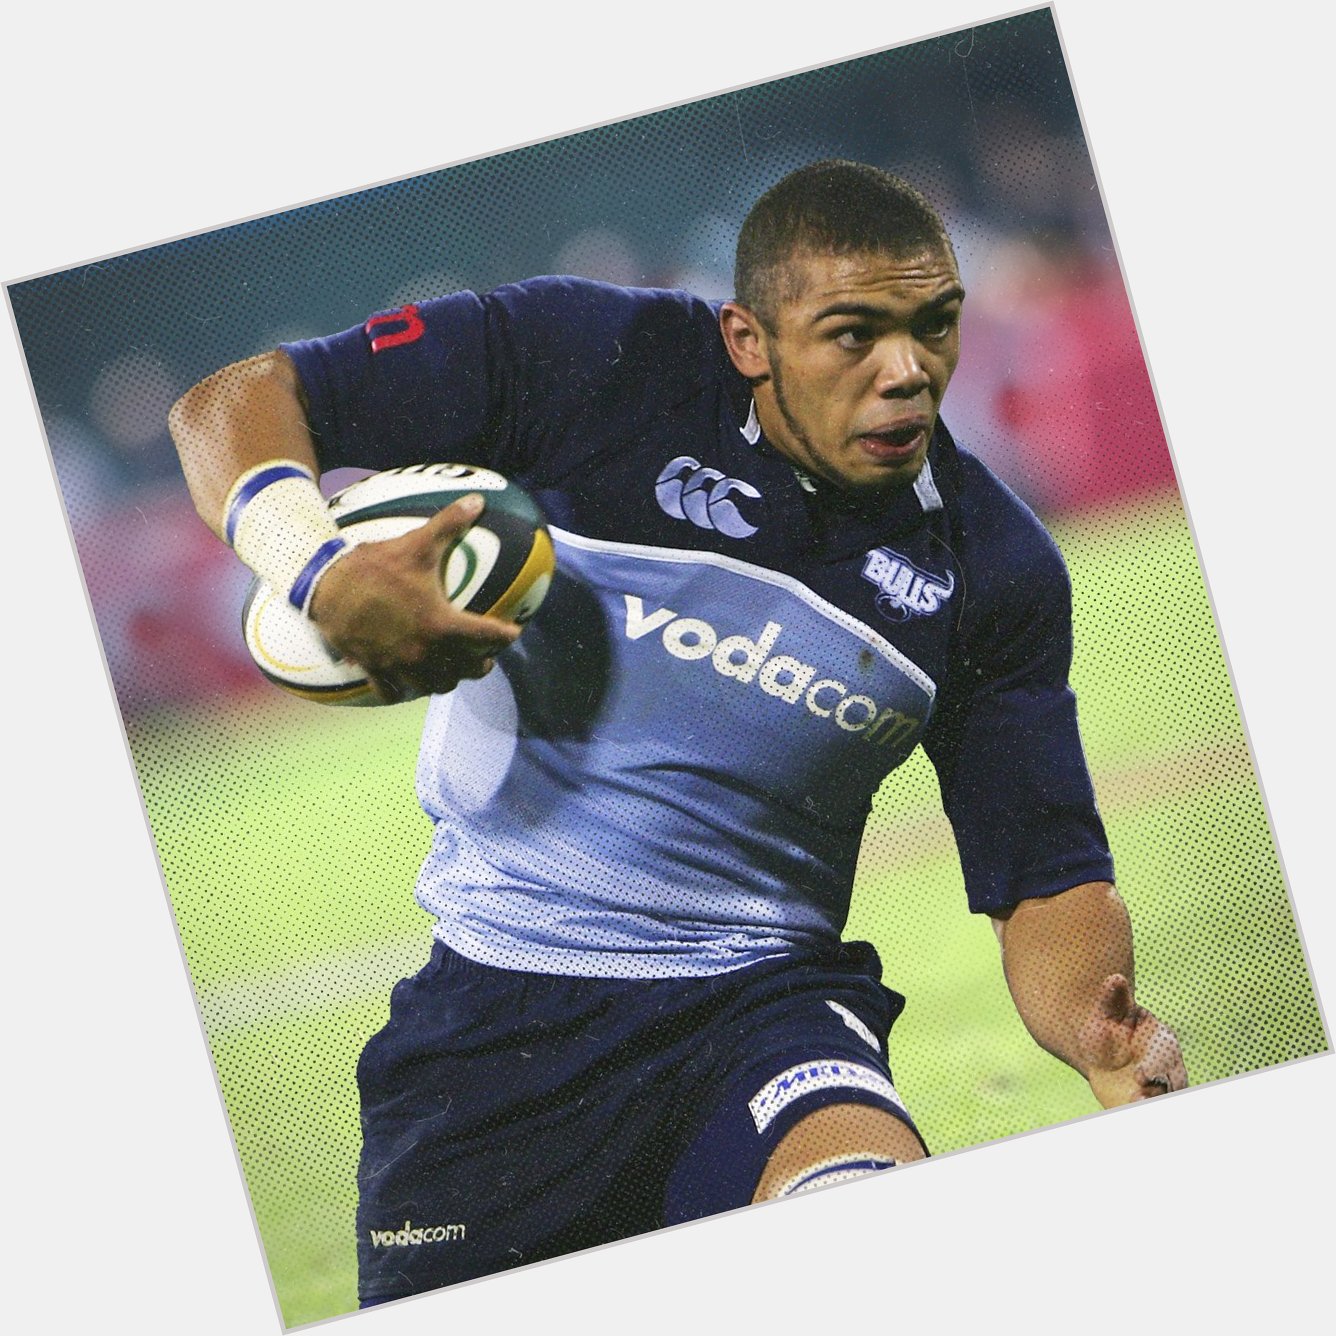  Happy birthday to South African rugby legend Bryan Habana!
